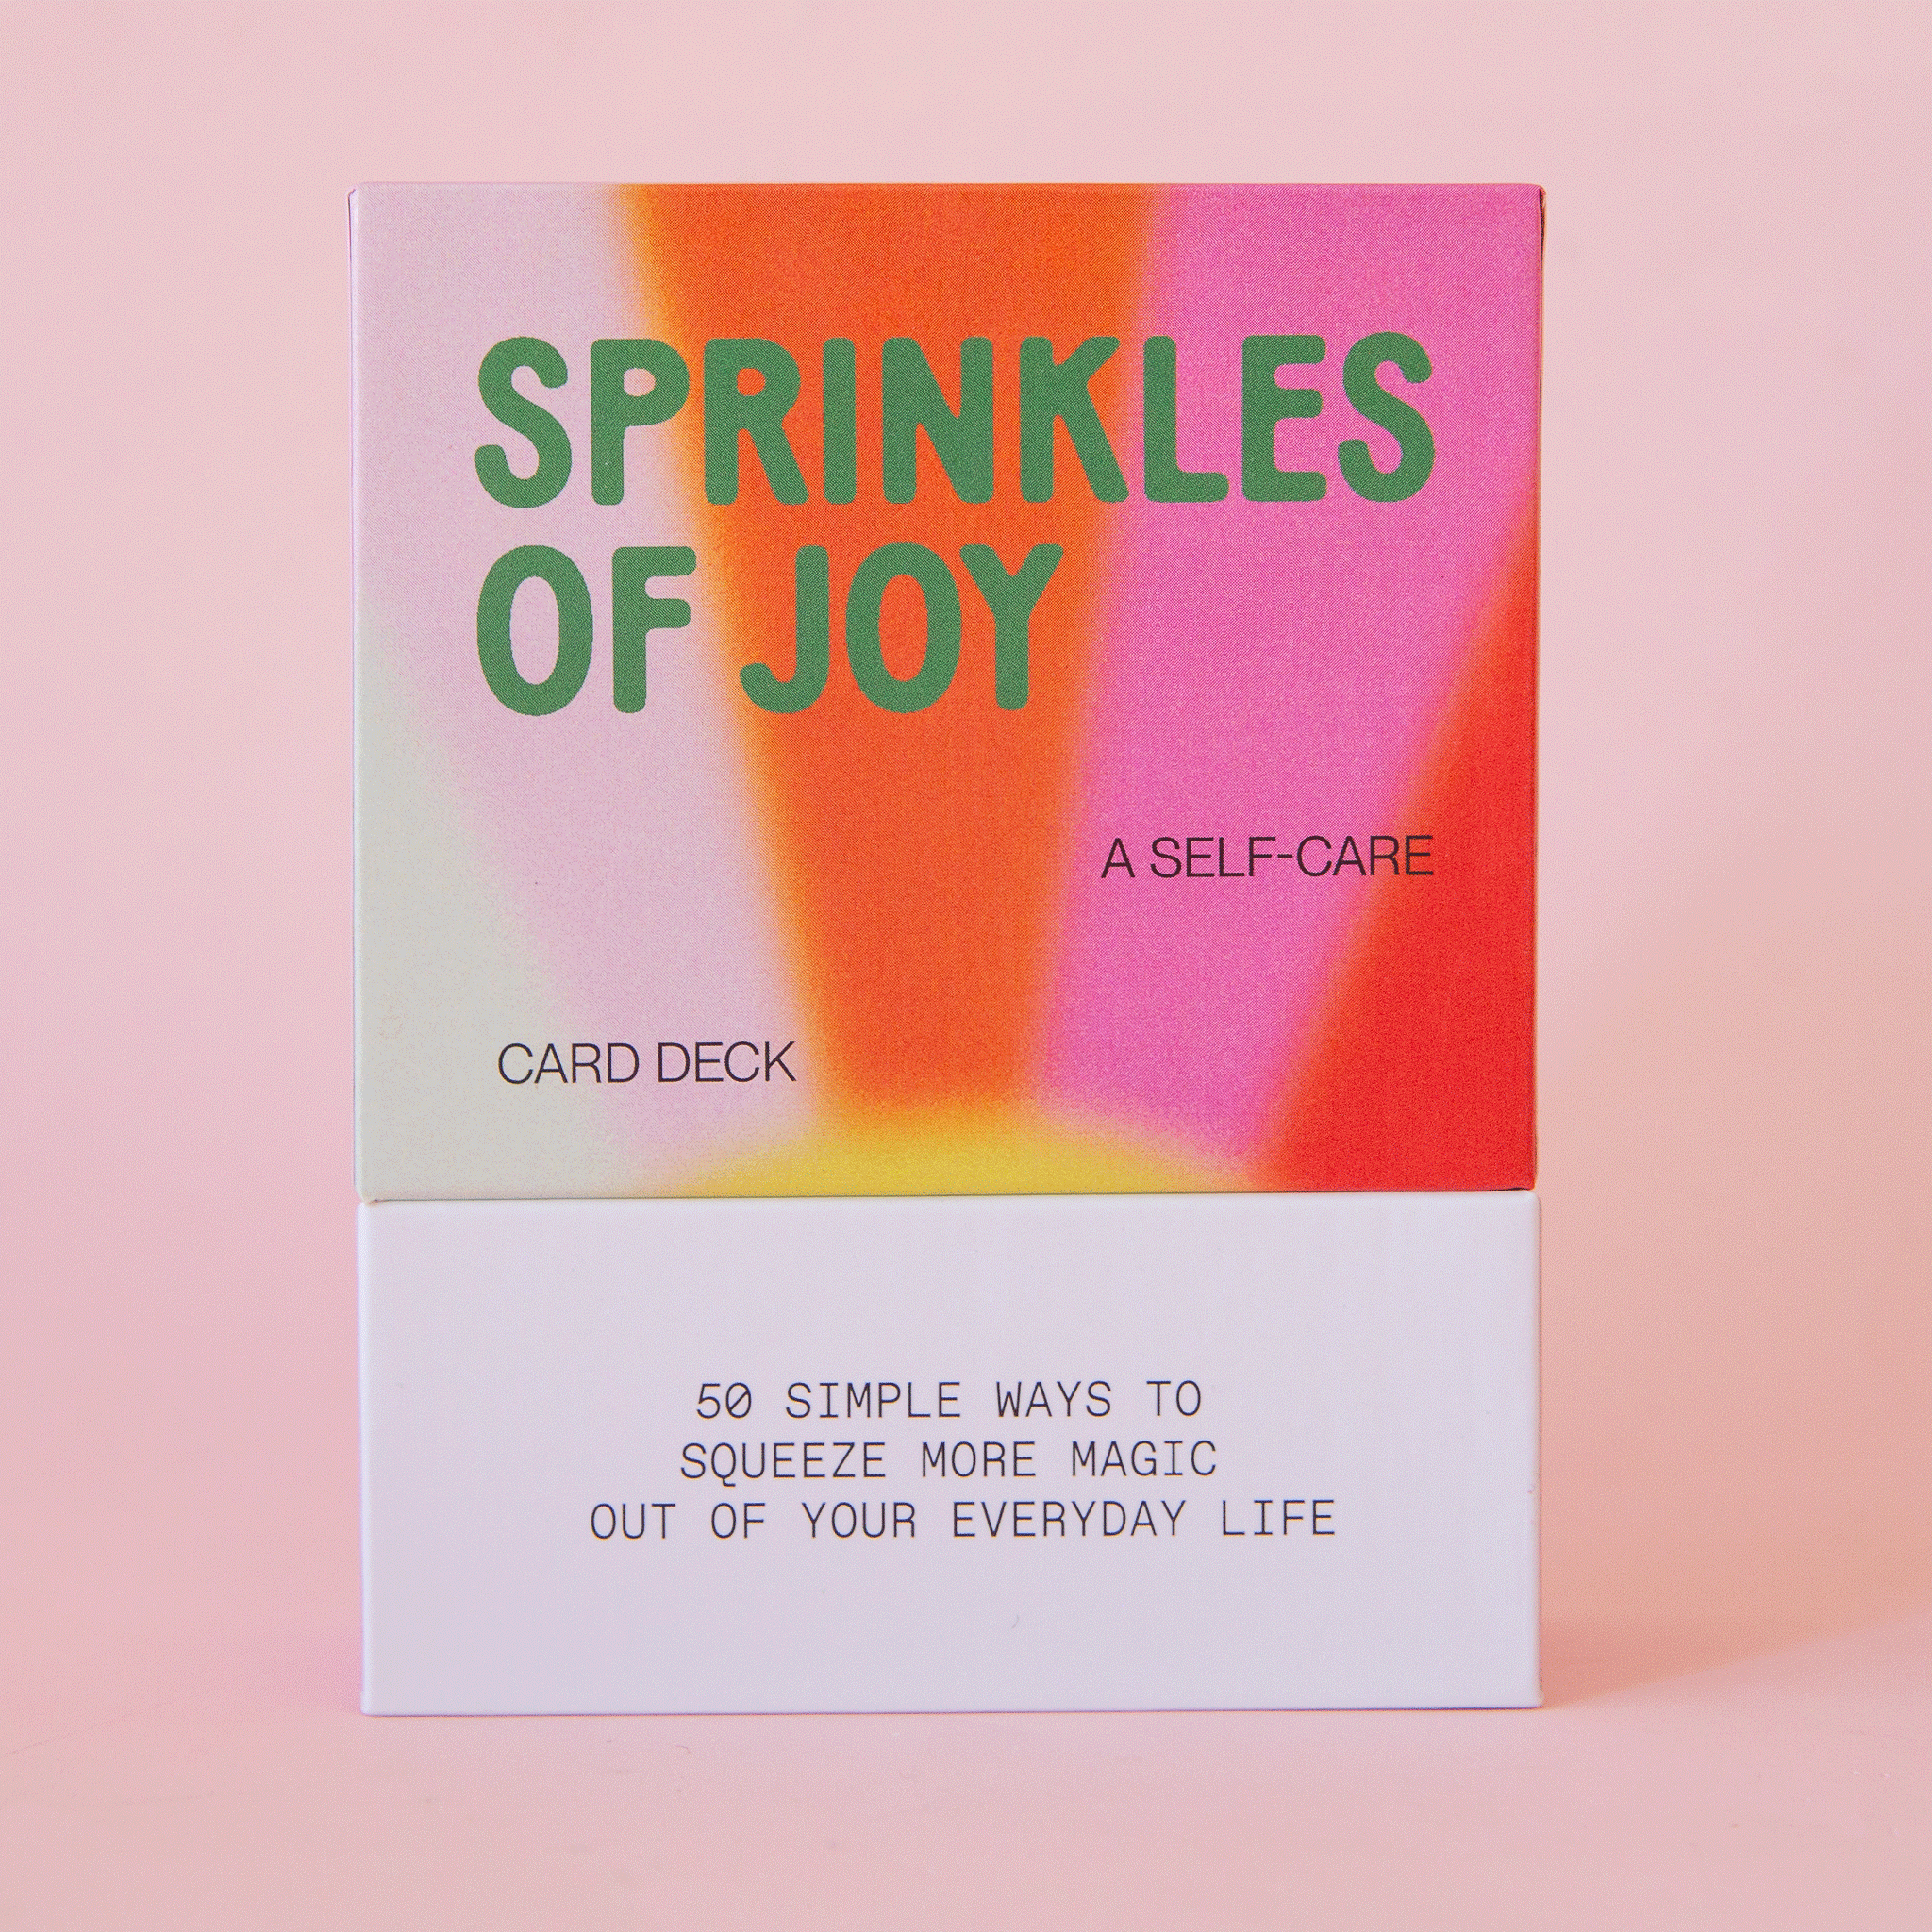 On a pink background is a deck of cards with a multicolored cover and text that reads, "Sprinkles Of Joy, A Self-Care Card Deck".